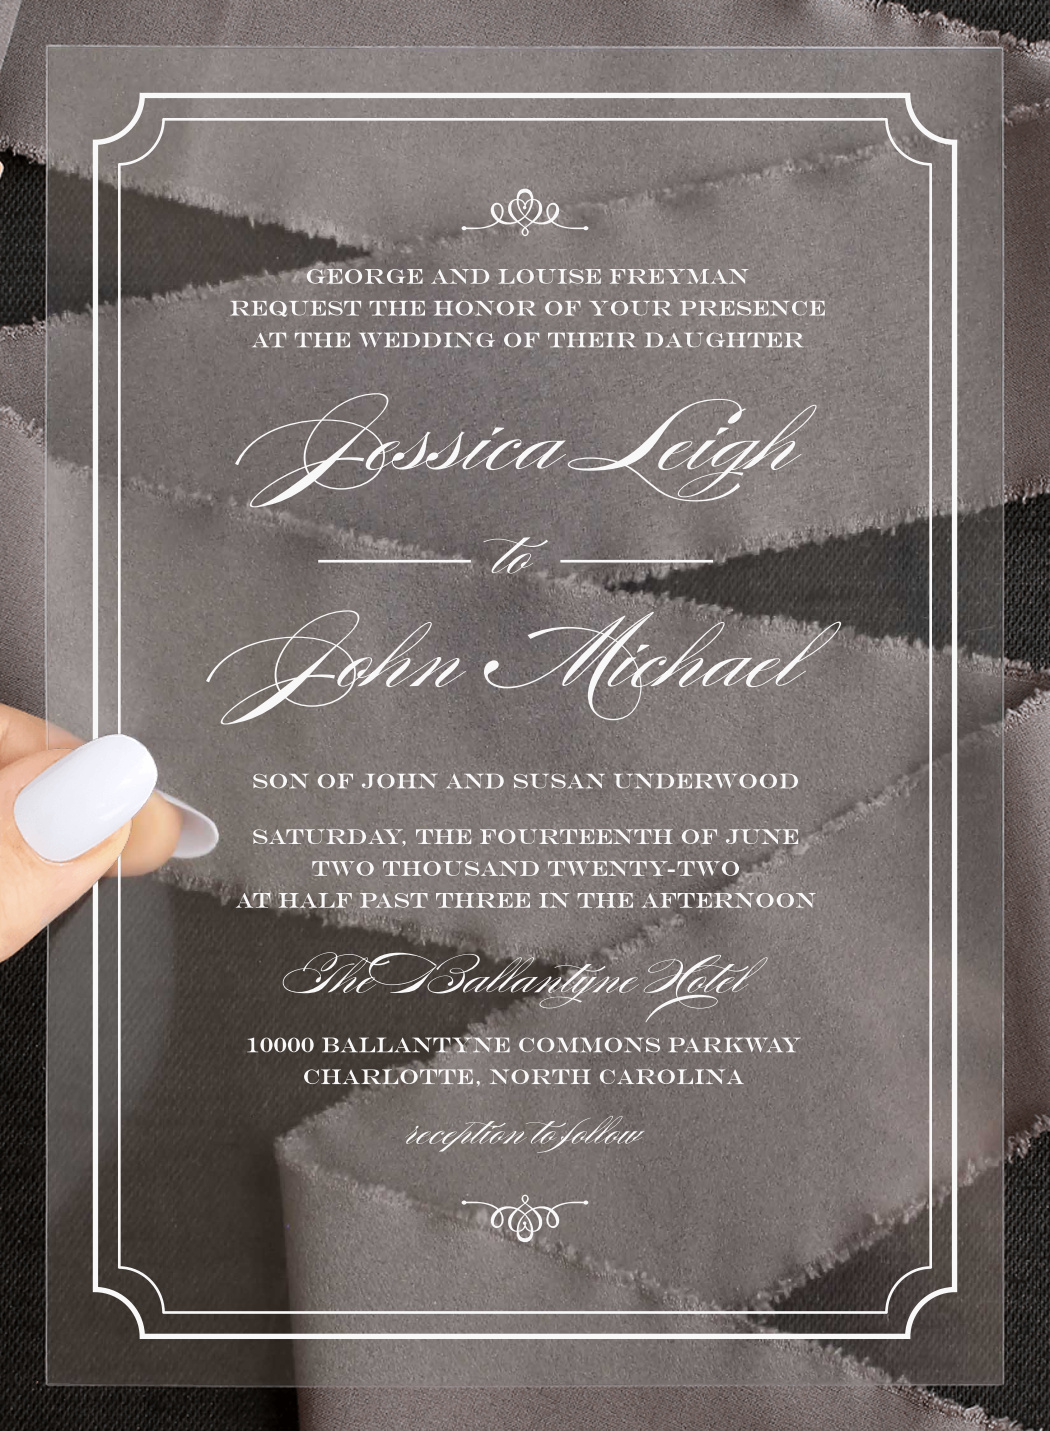 Ornate Calligraphy Clear Wedding Invitations by Basic Invite